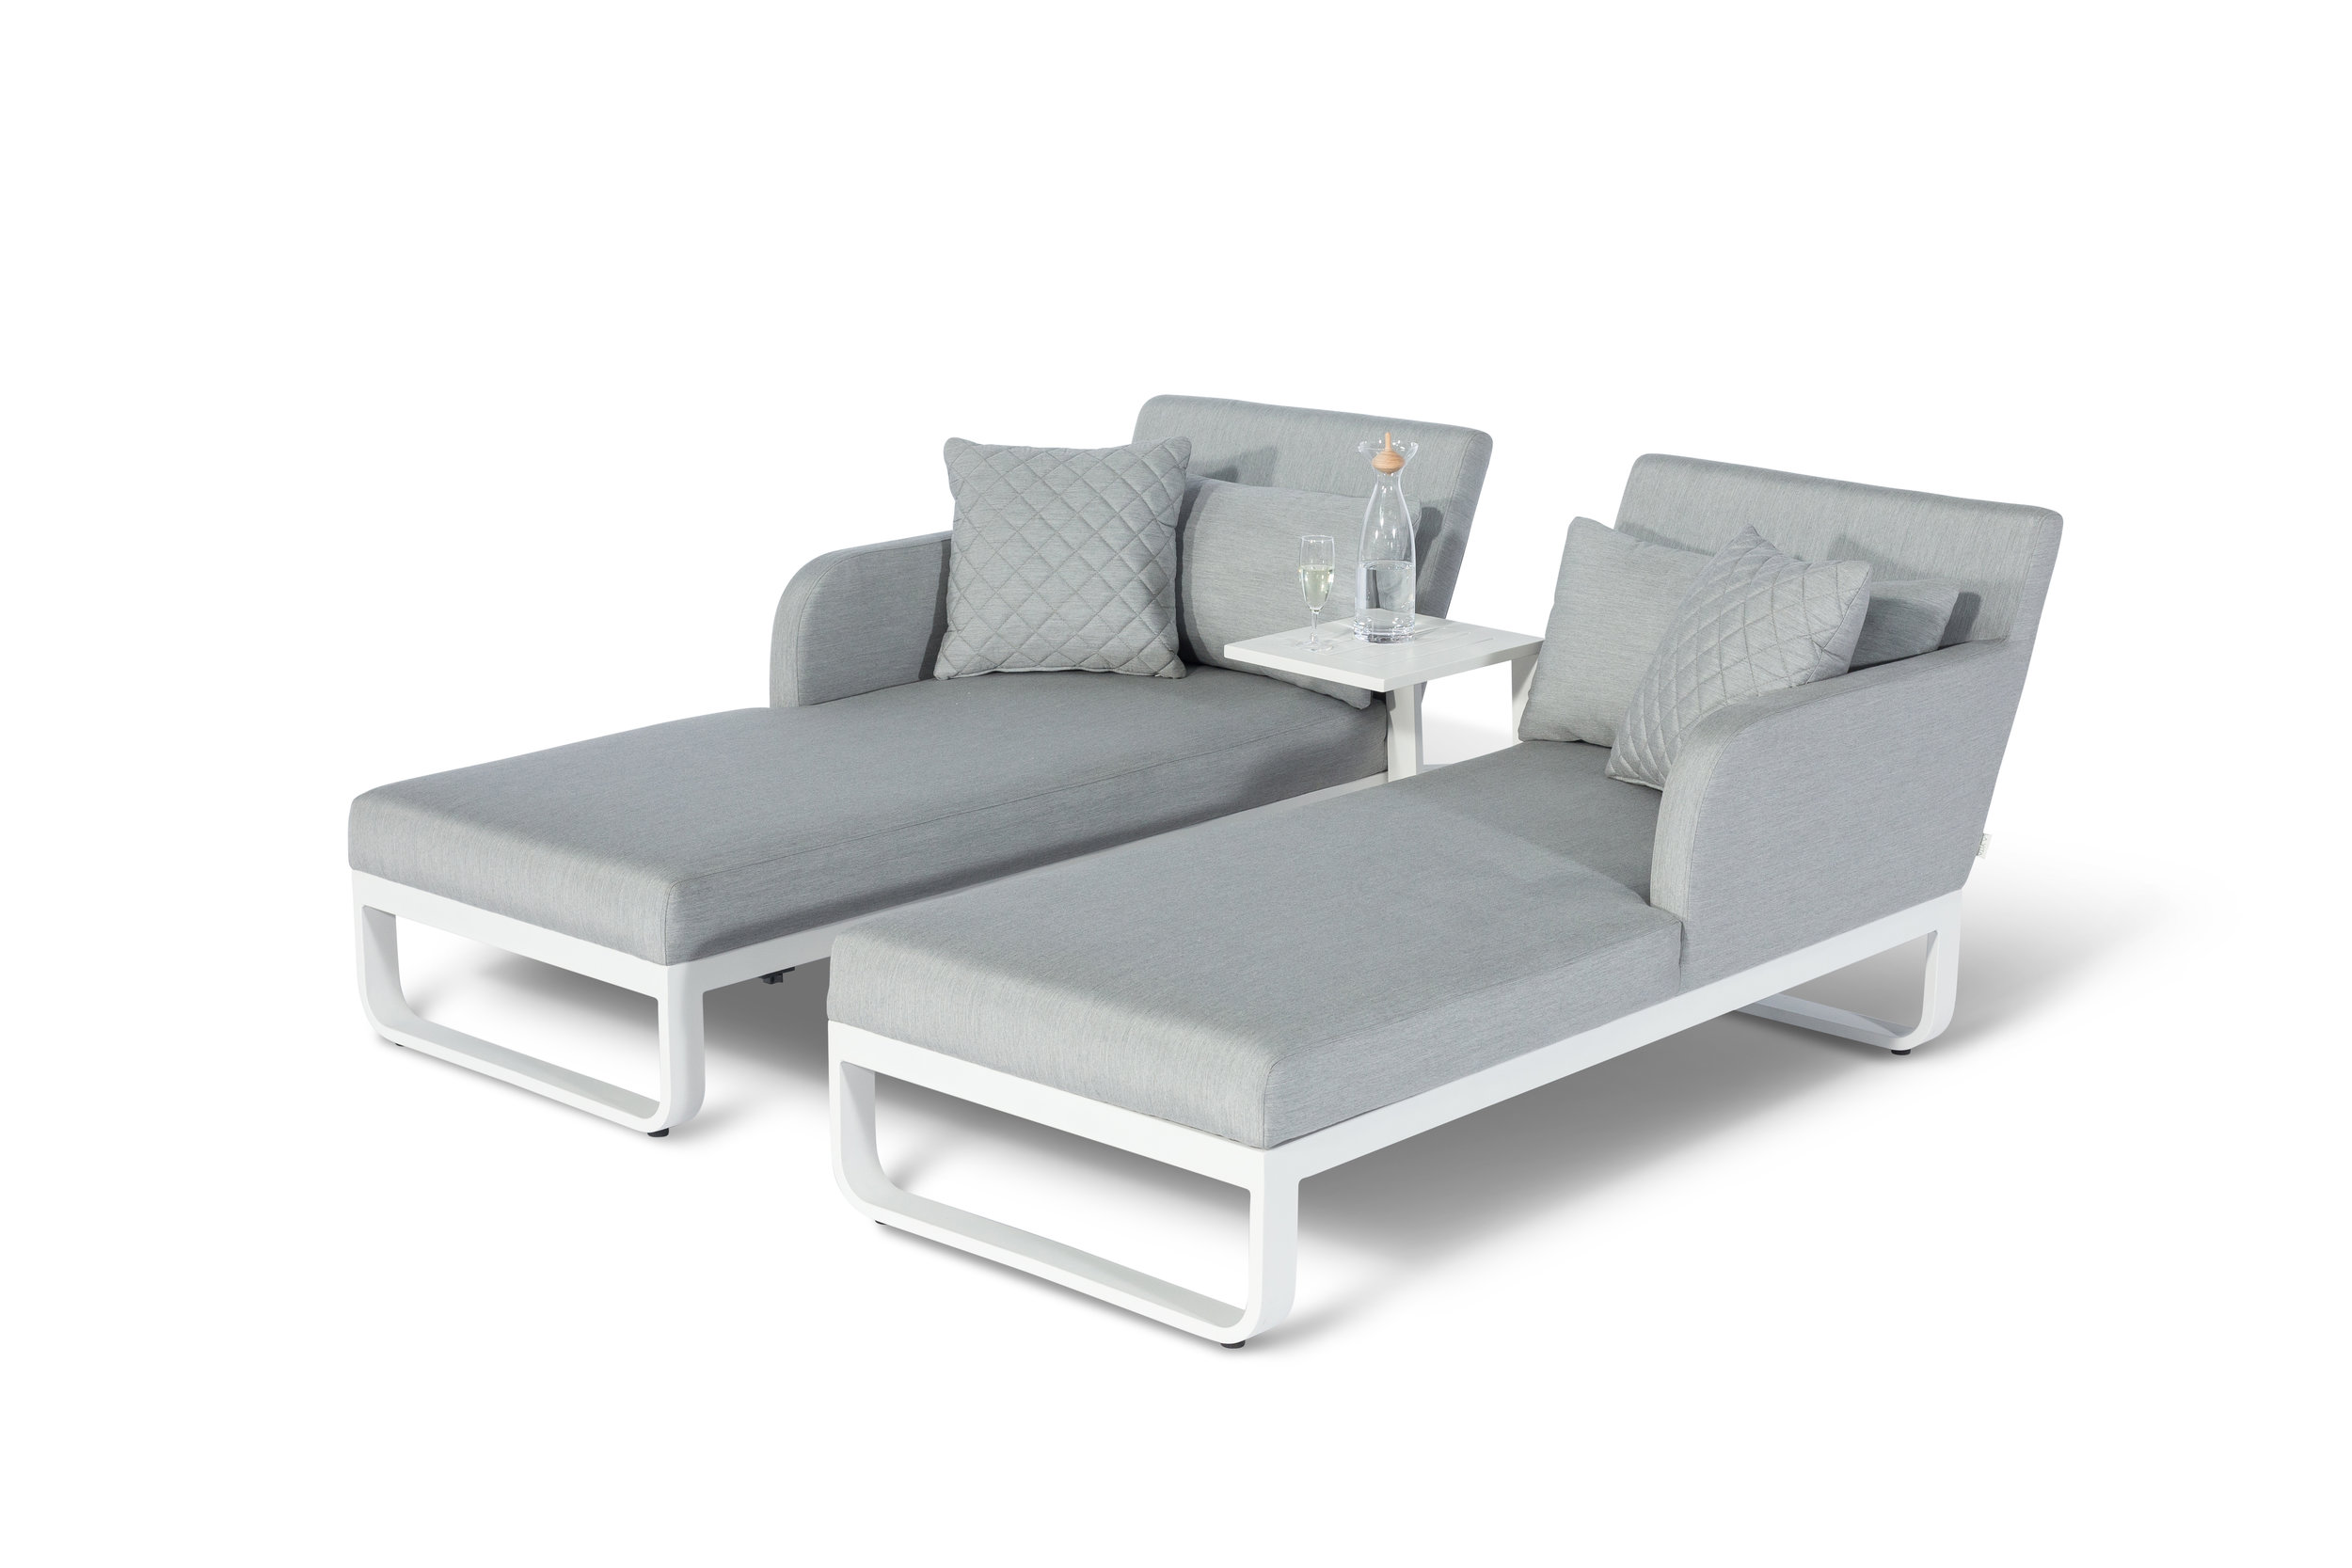 Unity Sunlounger (With Side Table)